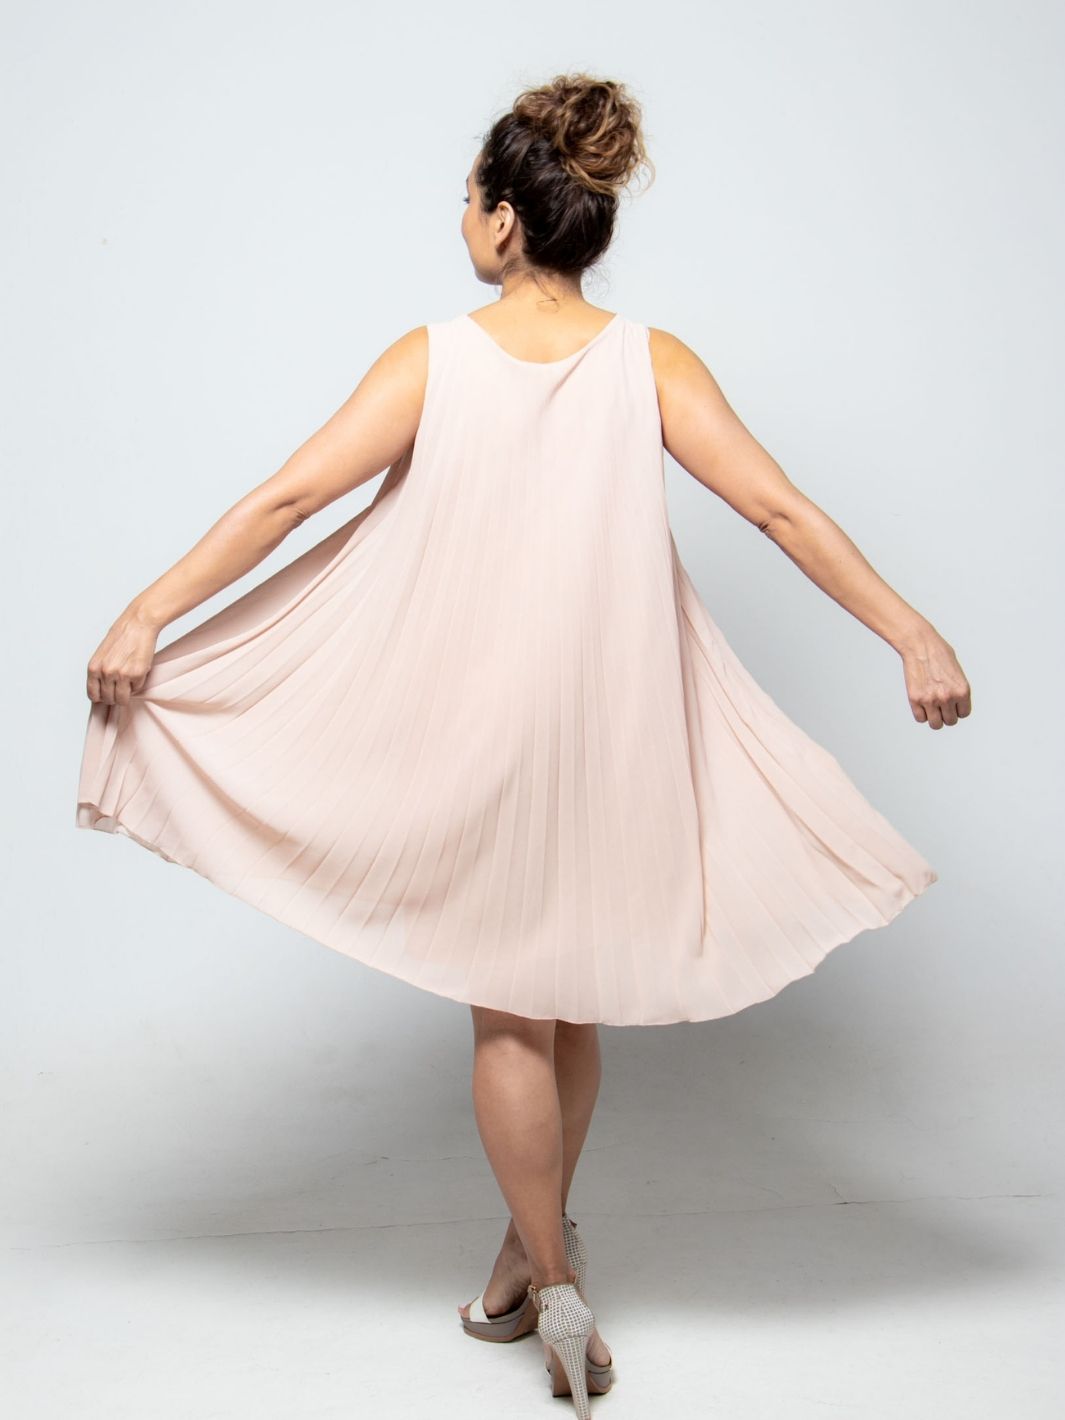 Pleated Mid Length Dress - Pink